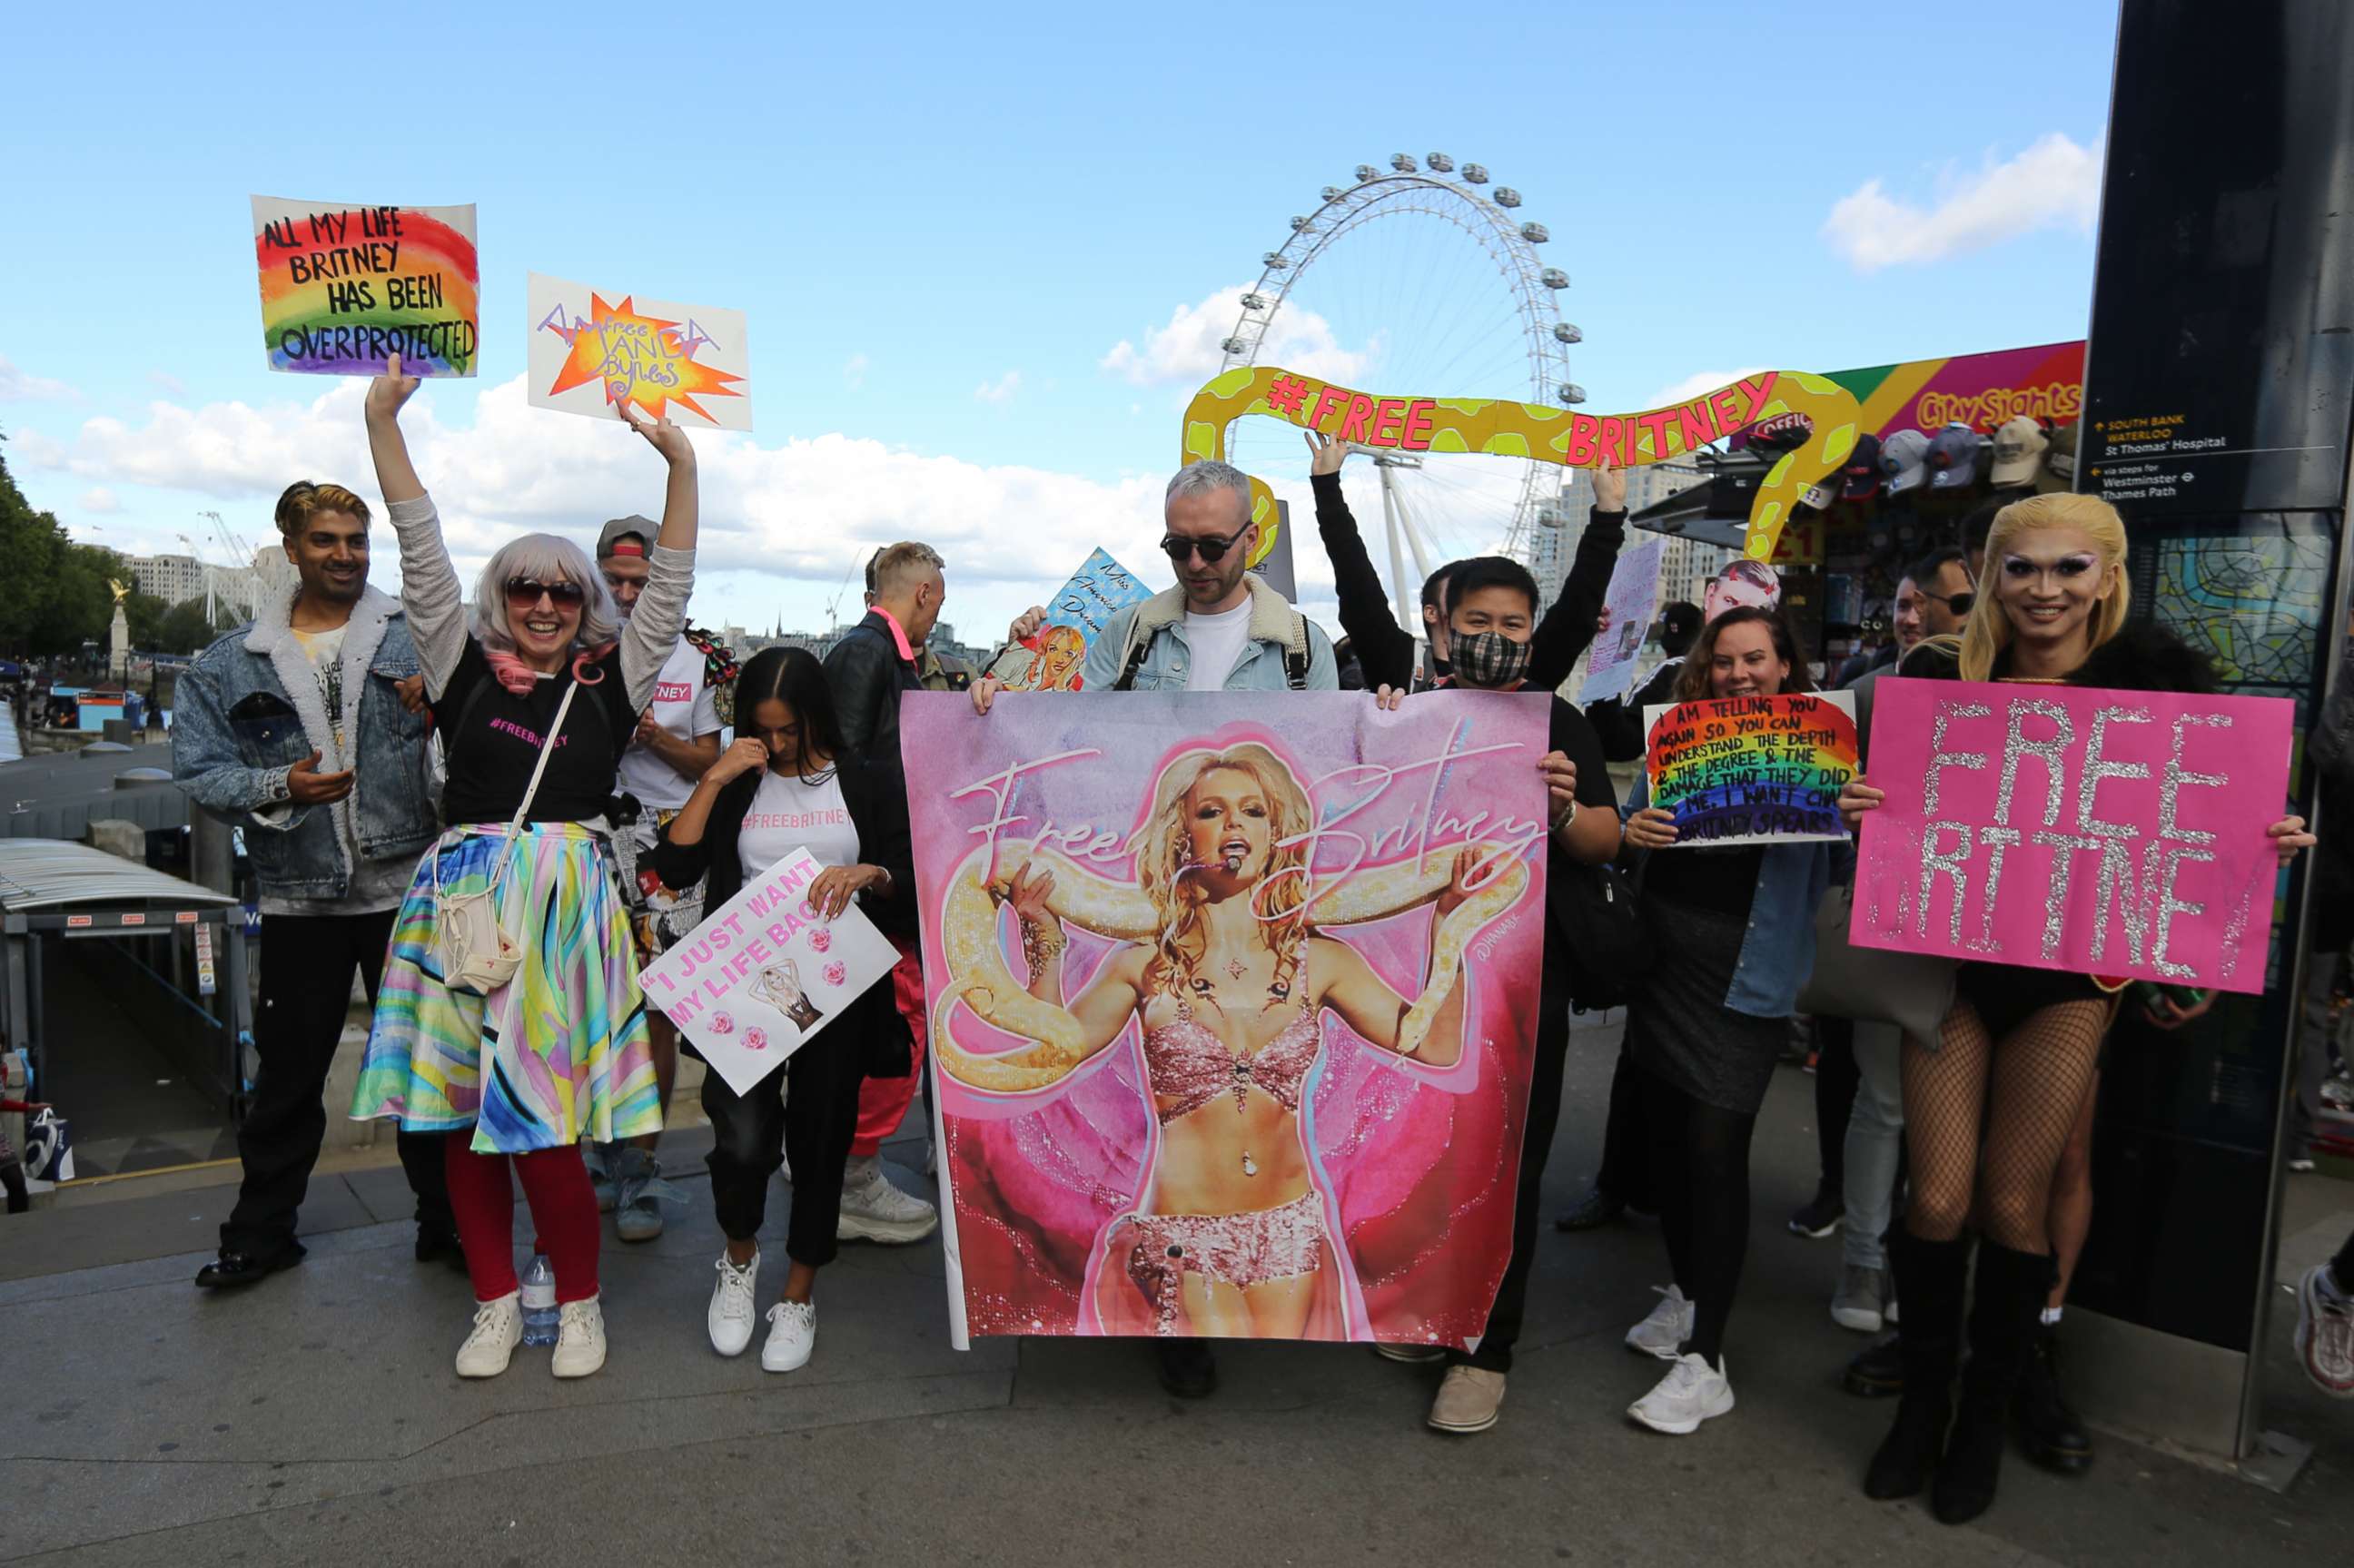 PHOTO: FreeBritney activists stage a protest in London calling the conservatorship over pop star Britney Spears to be lifted as the verdict is expected in the case today, Sept. 29, 2021.